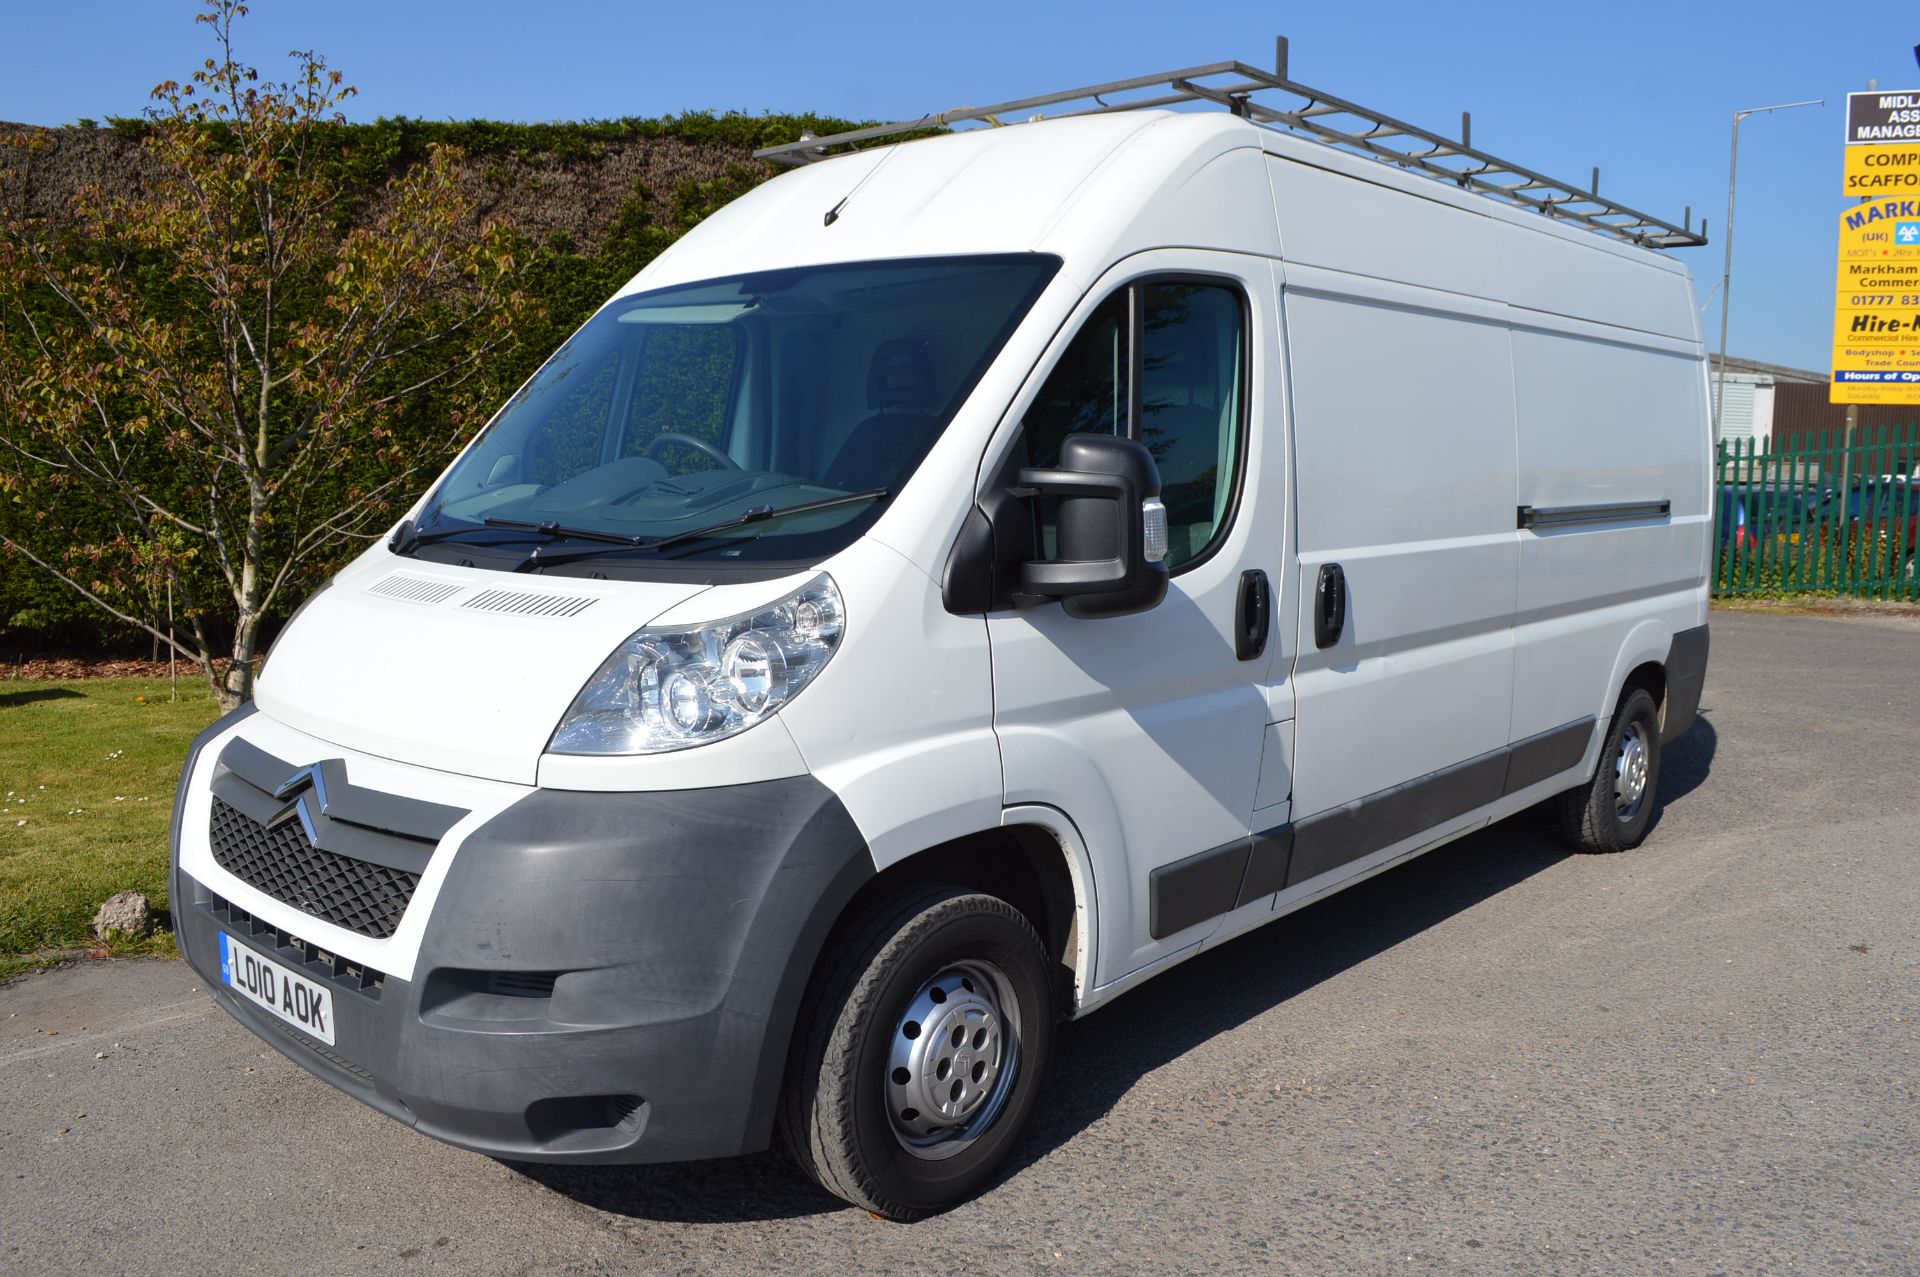 B - 2010/10 REG CITROEN RELAY 35 HDI 120 LWB, 2 FORMER KEEPERS   DATE OF REGISTRATION: 25TH AUGUST - Image 3 of 18